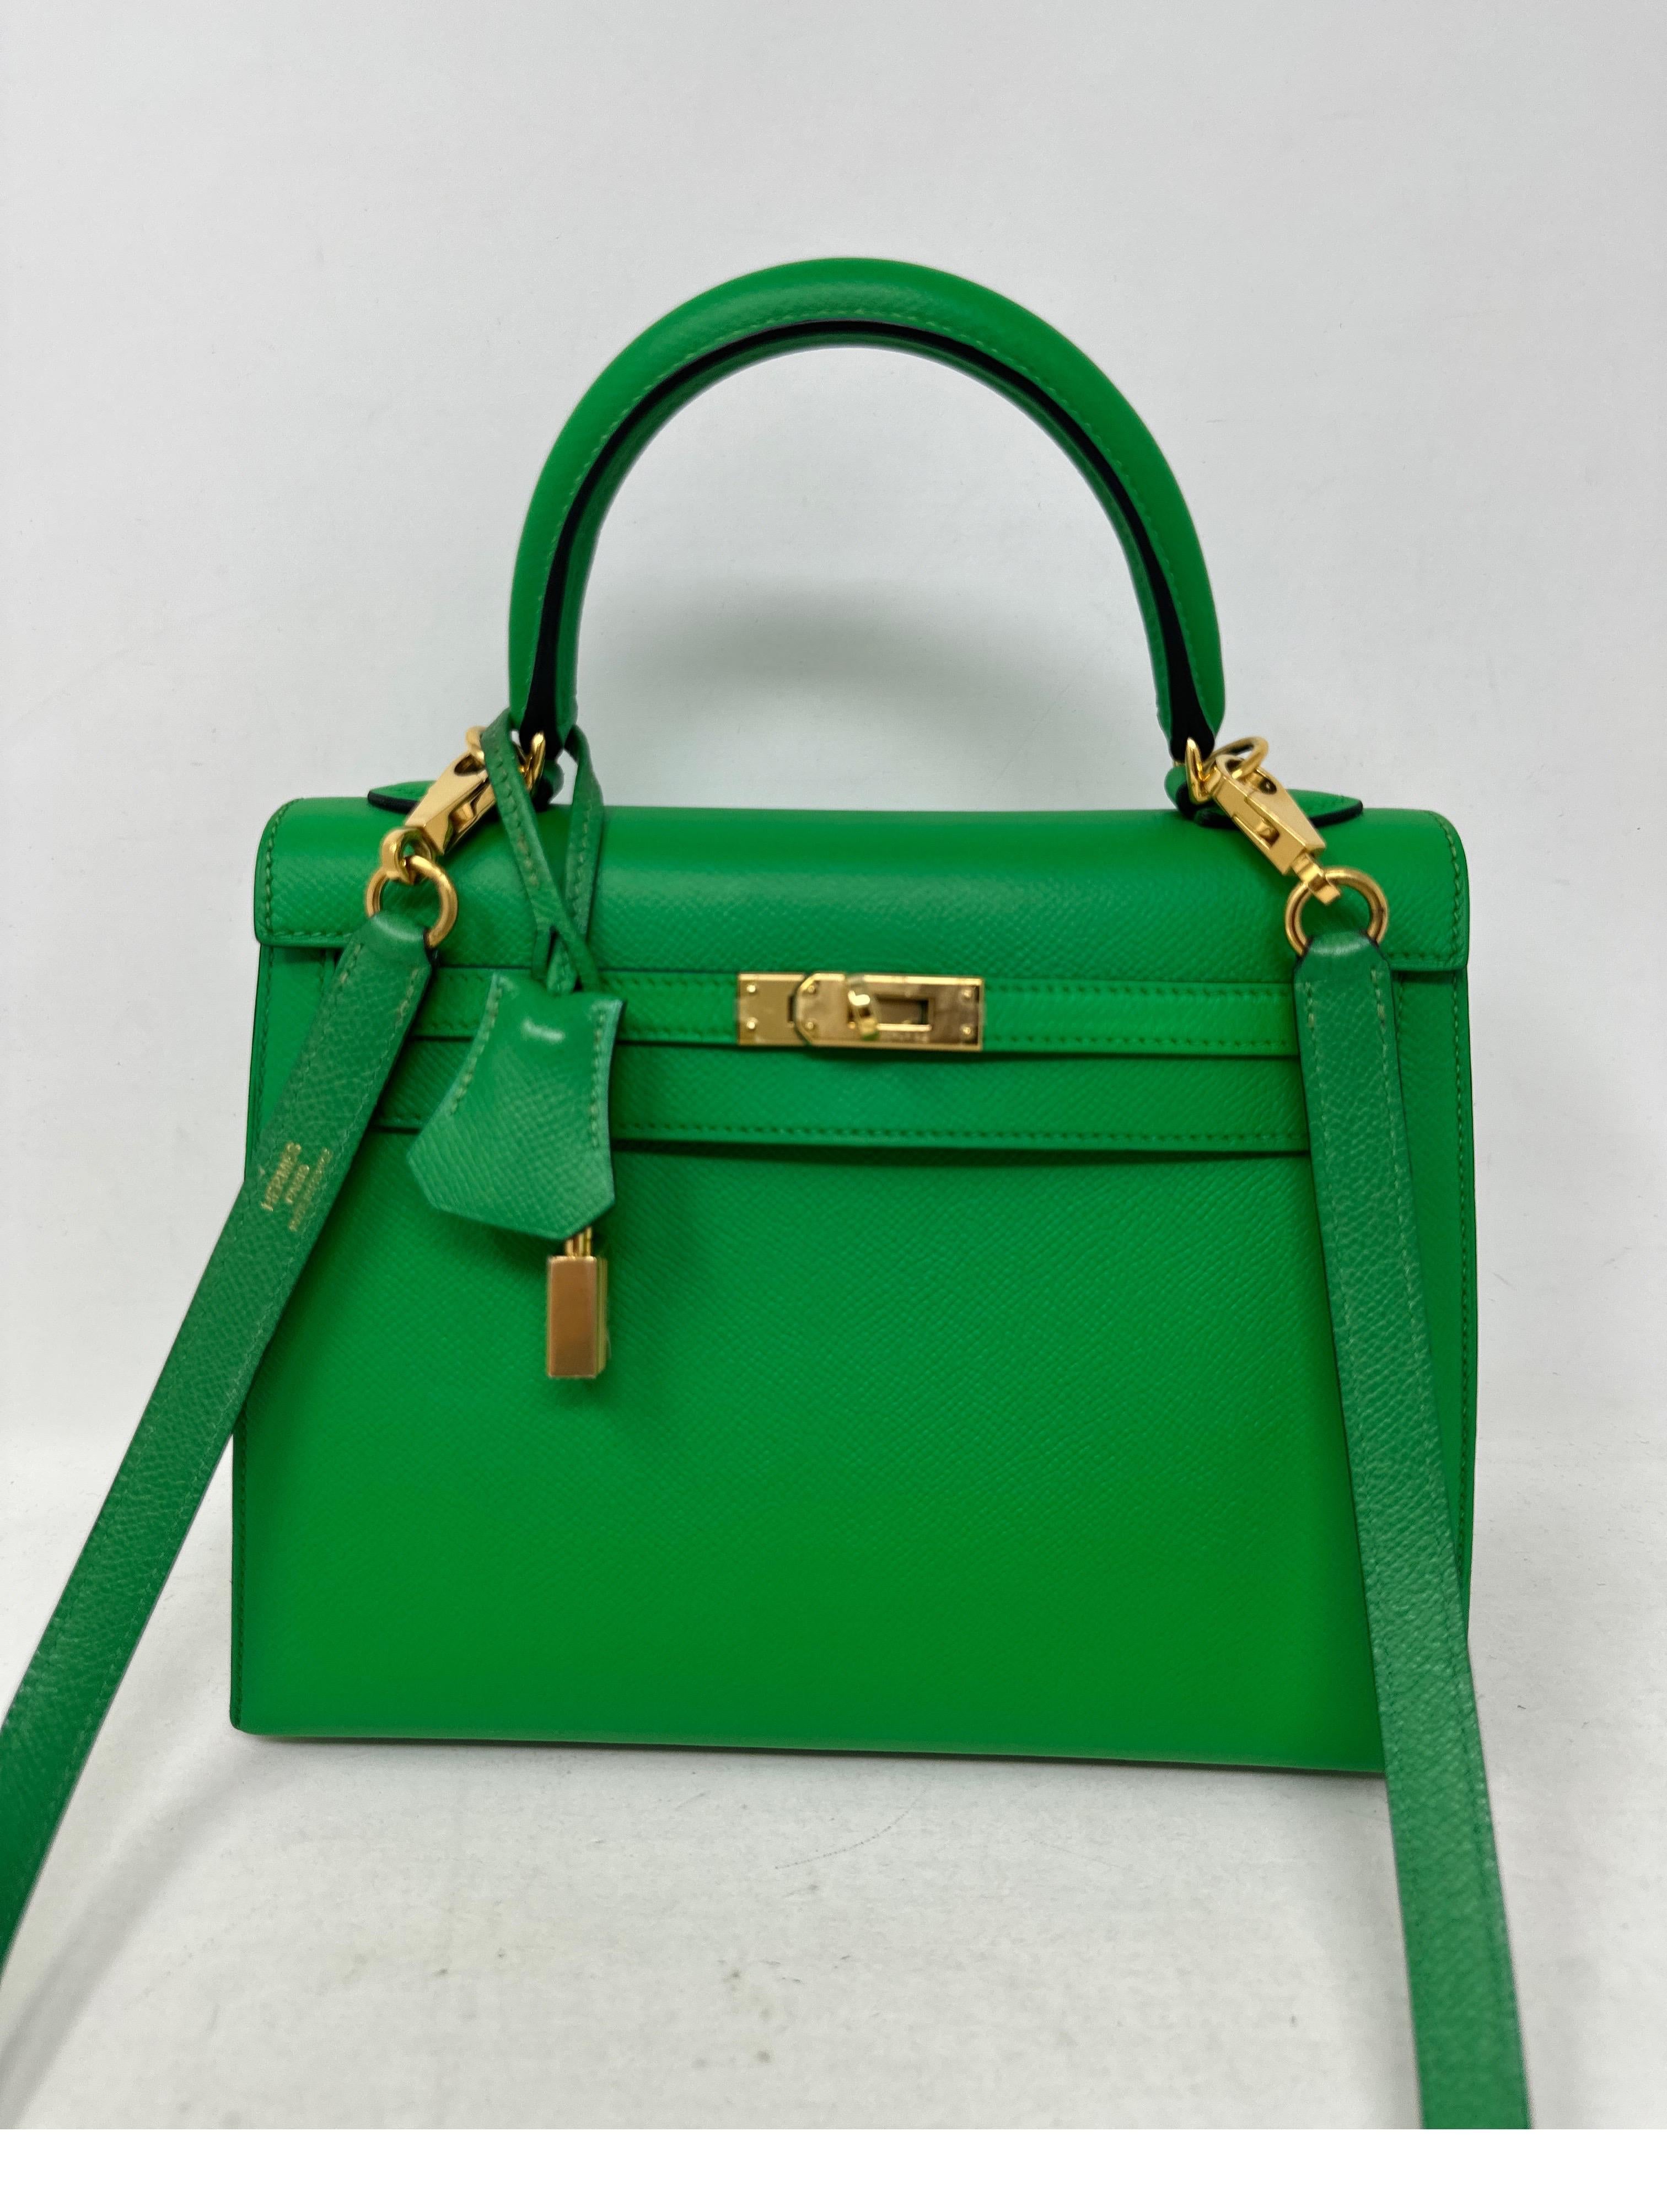 Hermes Bamboo Kelly 25 Bag. Rare size and color green epsom sellier leather bag. Gold hardware. Looks like new condition. Interior clean. Collector's piece. Includes clochette, lock, keys, and dust bag. Guaranteed authentic. 